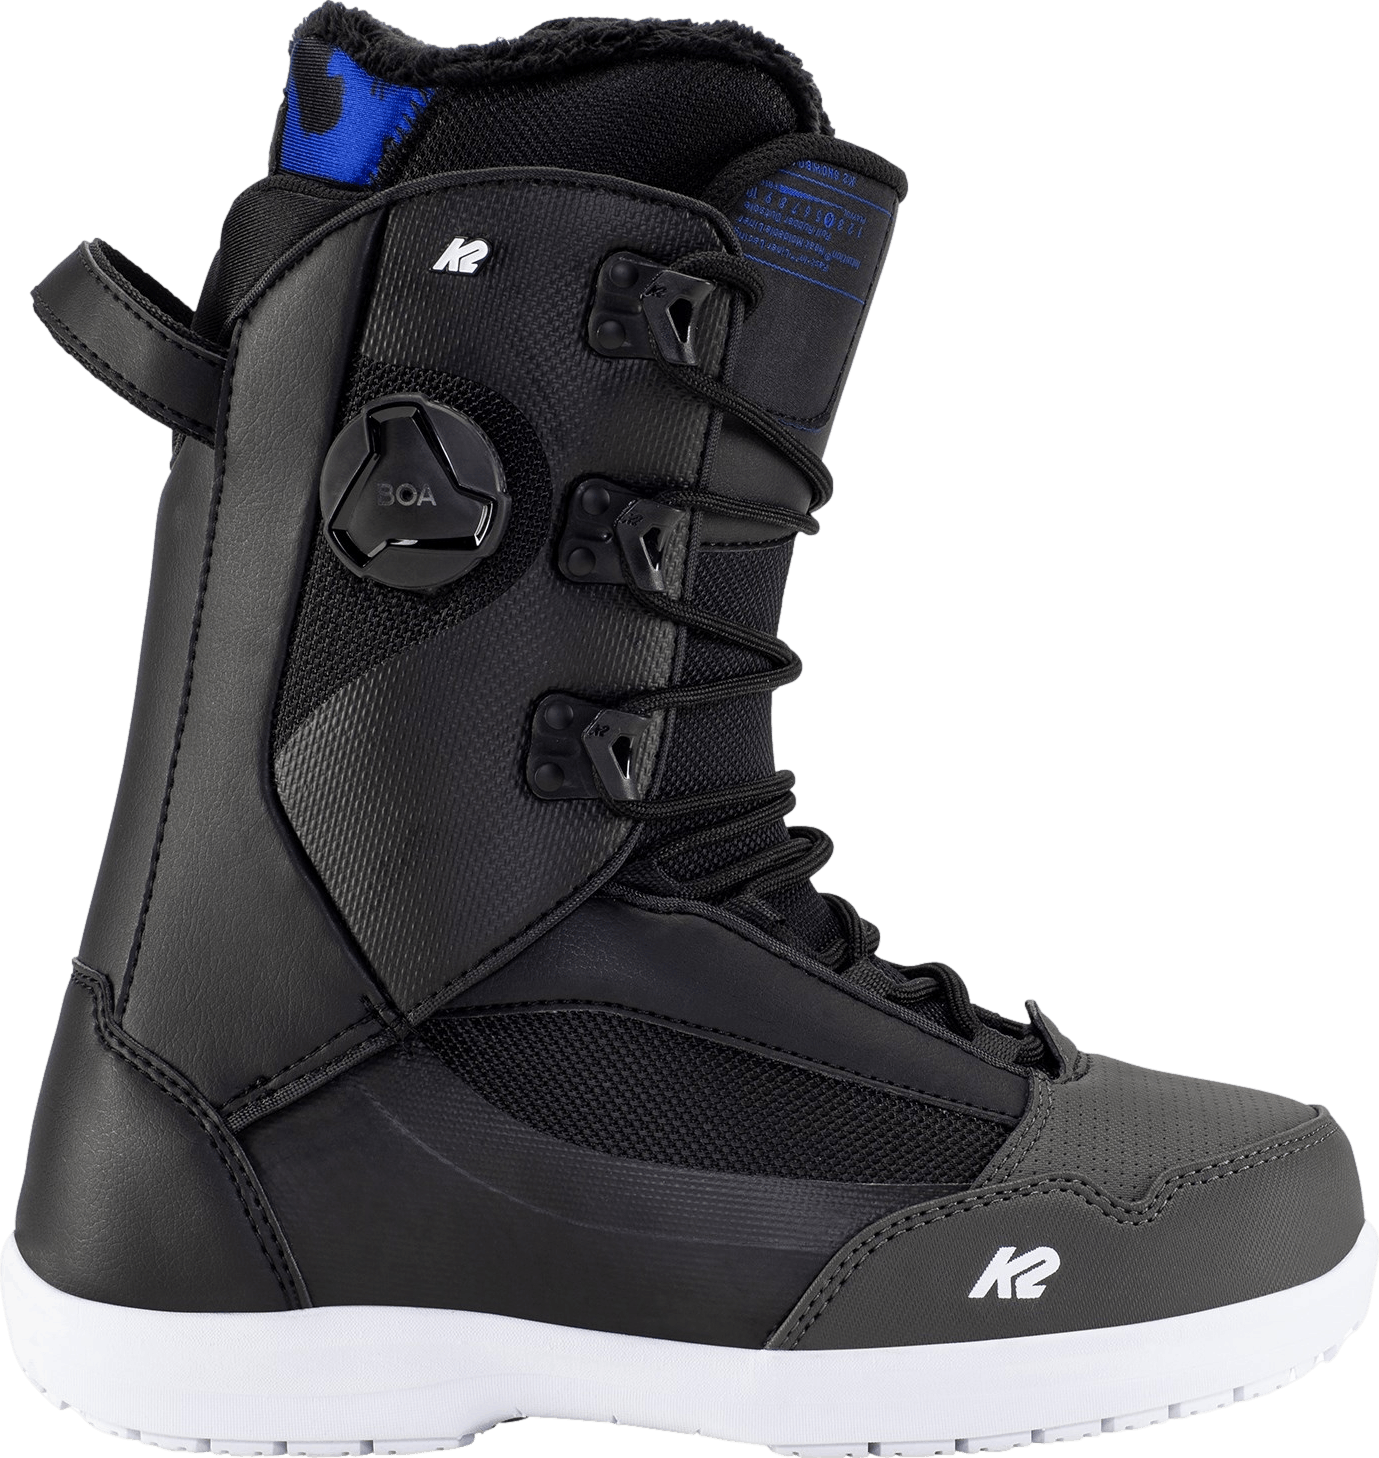 K2 Cosmo Snowboard Boots · Women's · 2021